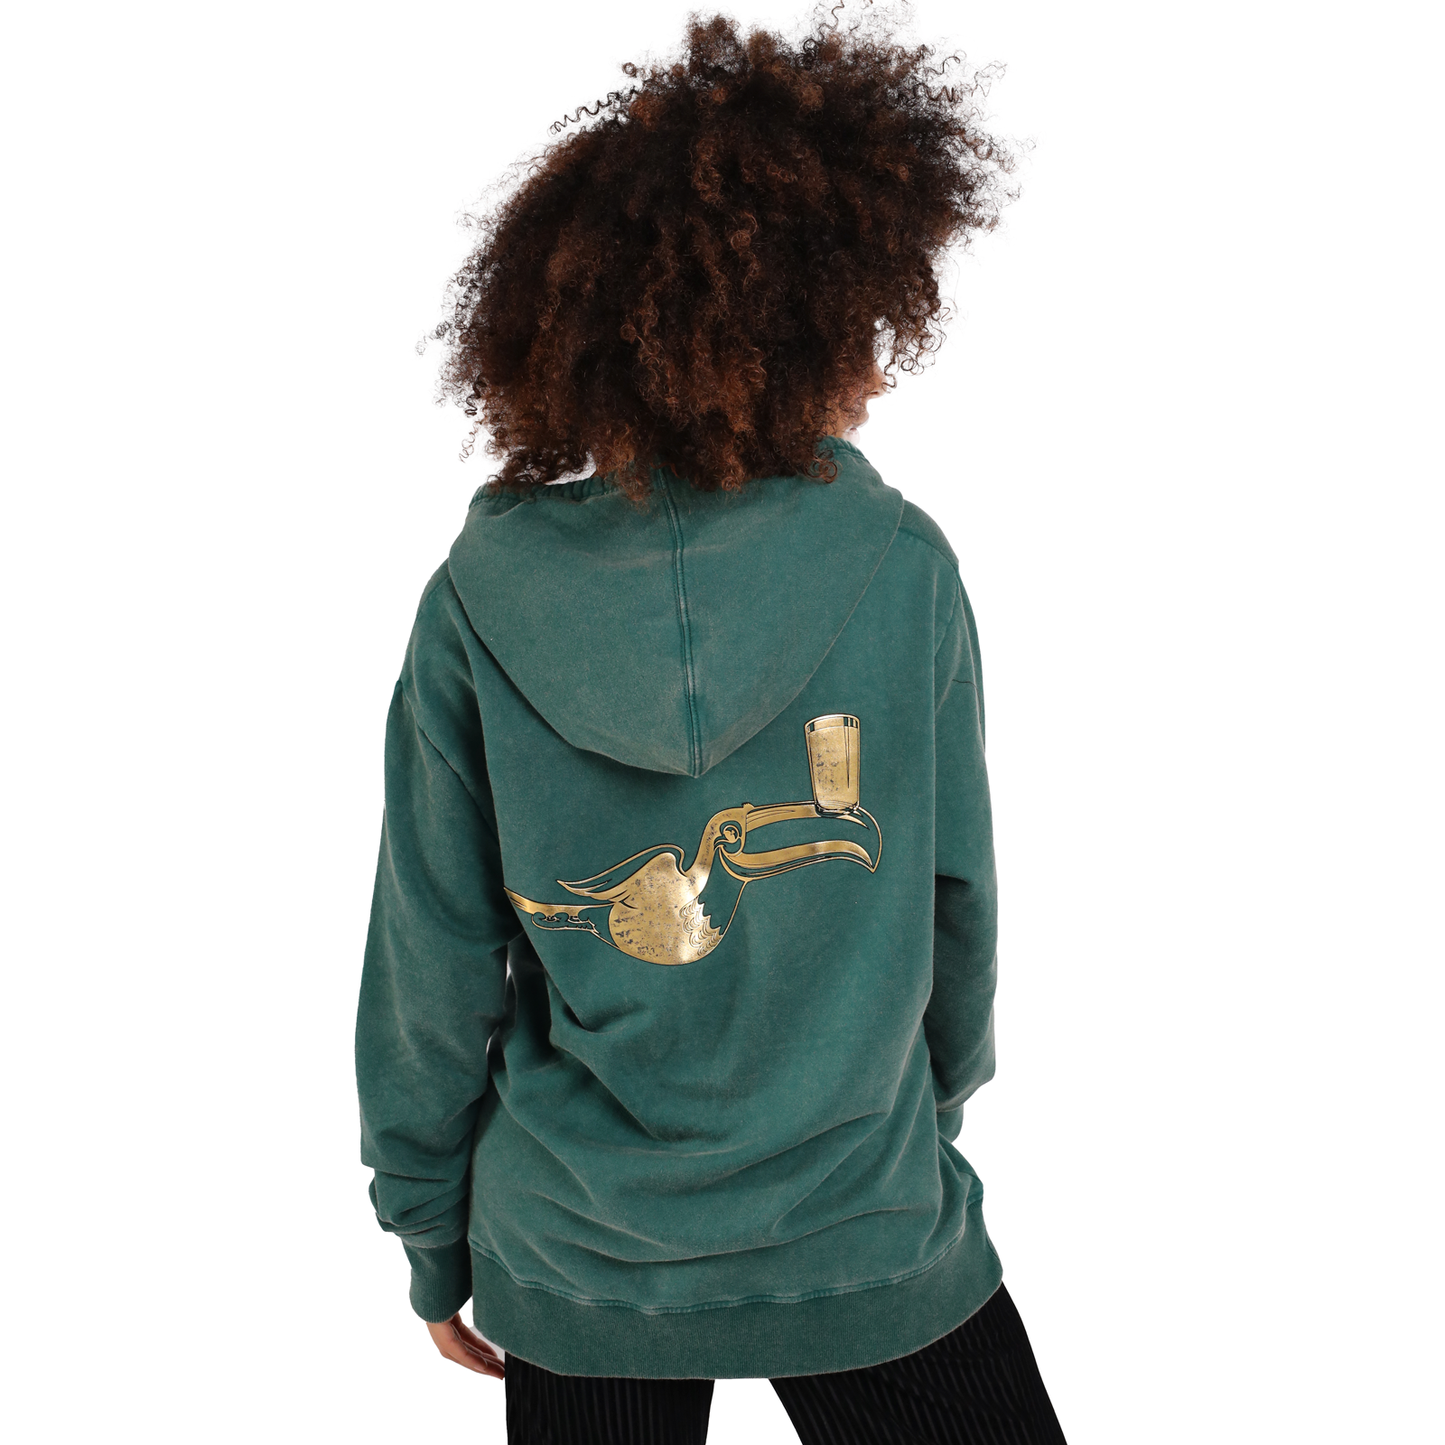 The back of a woman wearing a Guinness Forest Green & Gold Toucan Hoodie from the Guinness Webstore UK.